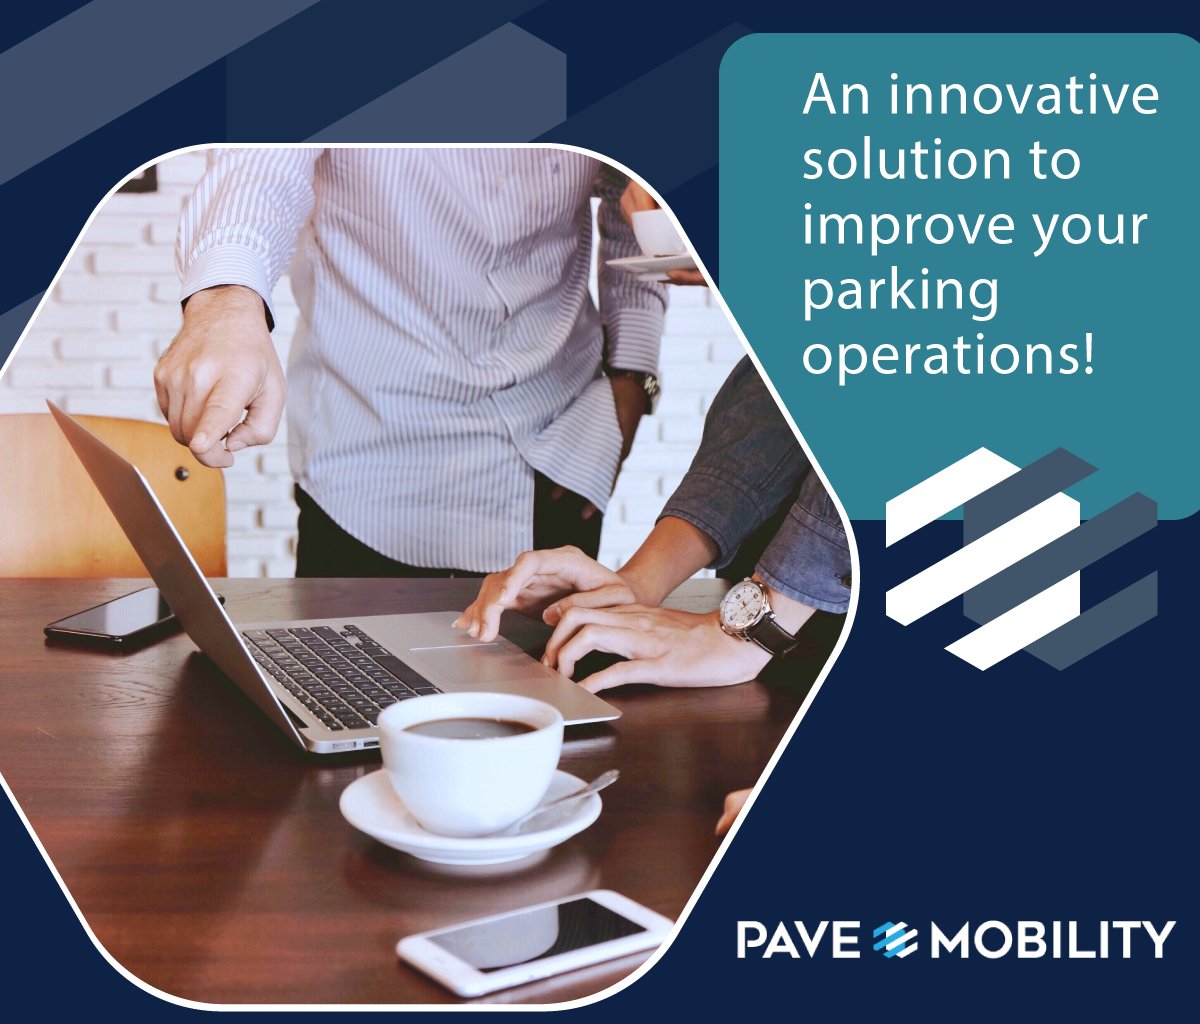 🅿️ Looking for an innovative solution to improve your parking operations? 
👍 You found it! Schedule a demo TODAY ➡️ hubs.la/Q02sLlRM0

#parking #lpr #technology #enforcement #UrbanMobility #smartparking #ParkingManagement #MobilitySolutions #parkingtech #Floridatech